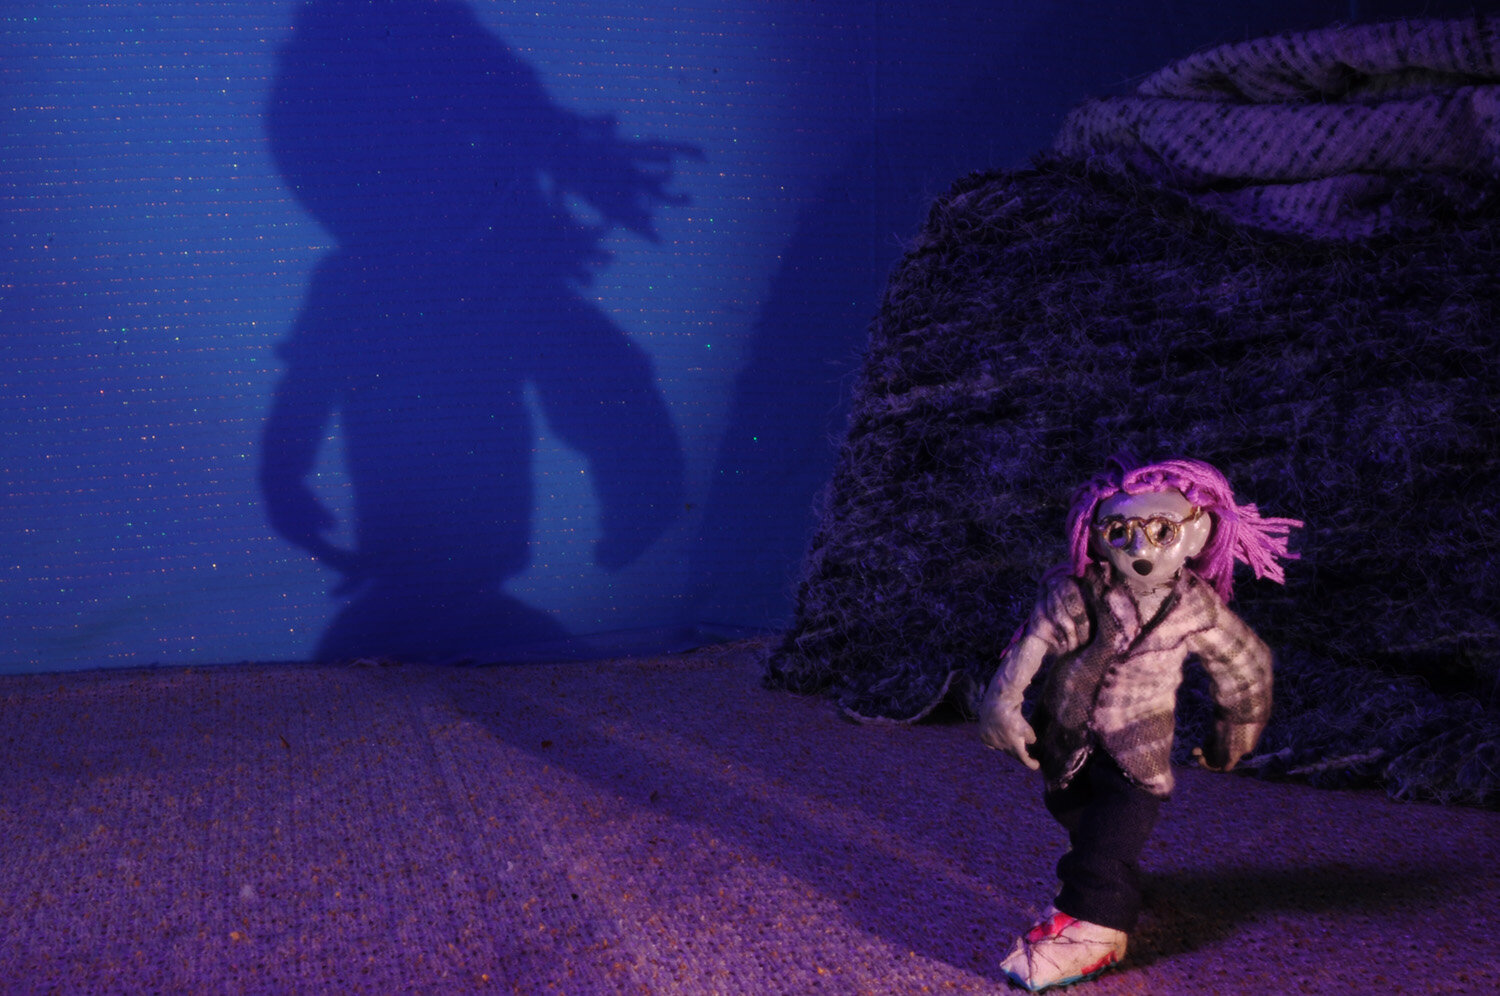  A claymation scene of a young girl with purple hair running. Behind her is a dark purple rock, and her shadow can be seen against the blue wall. 